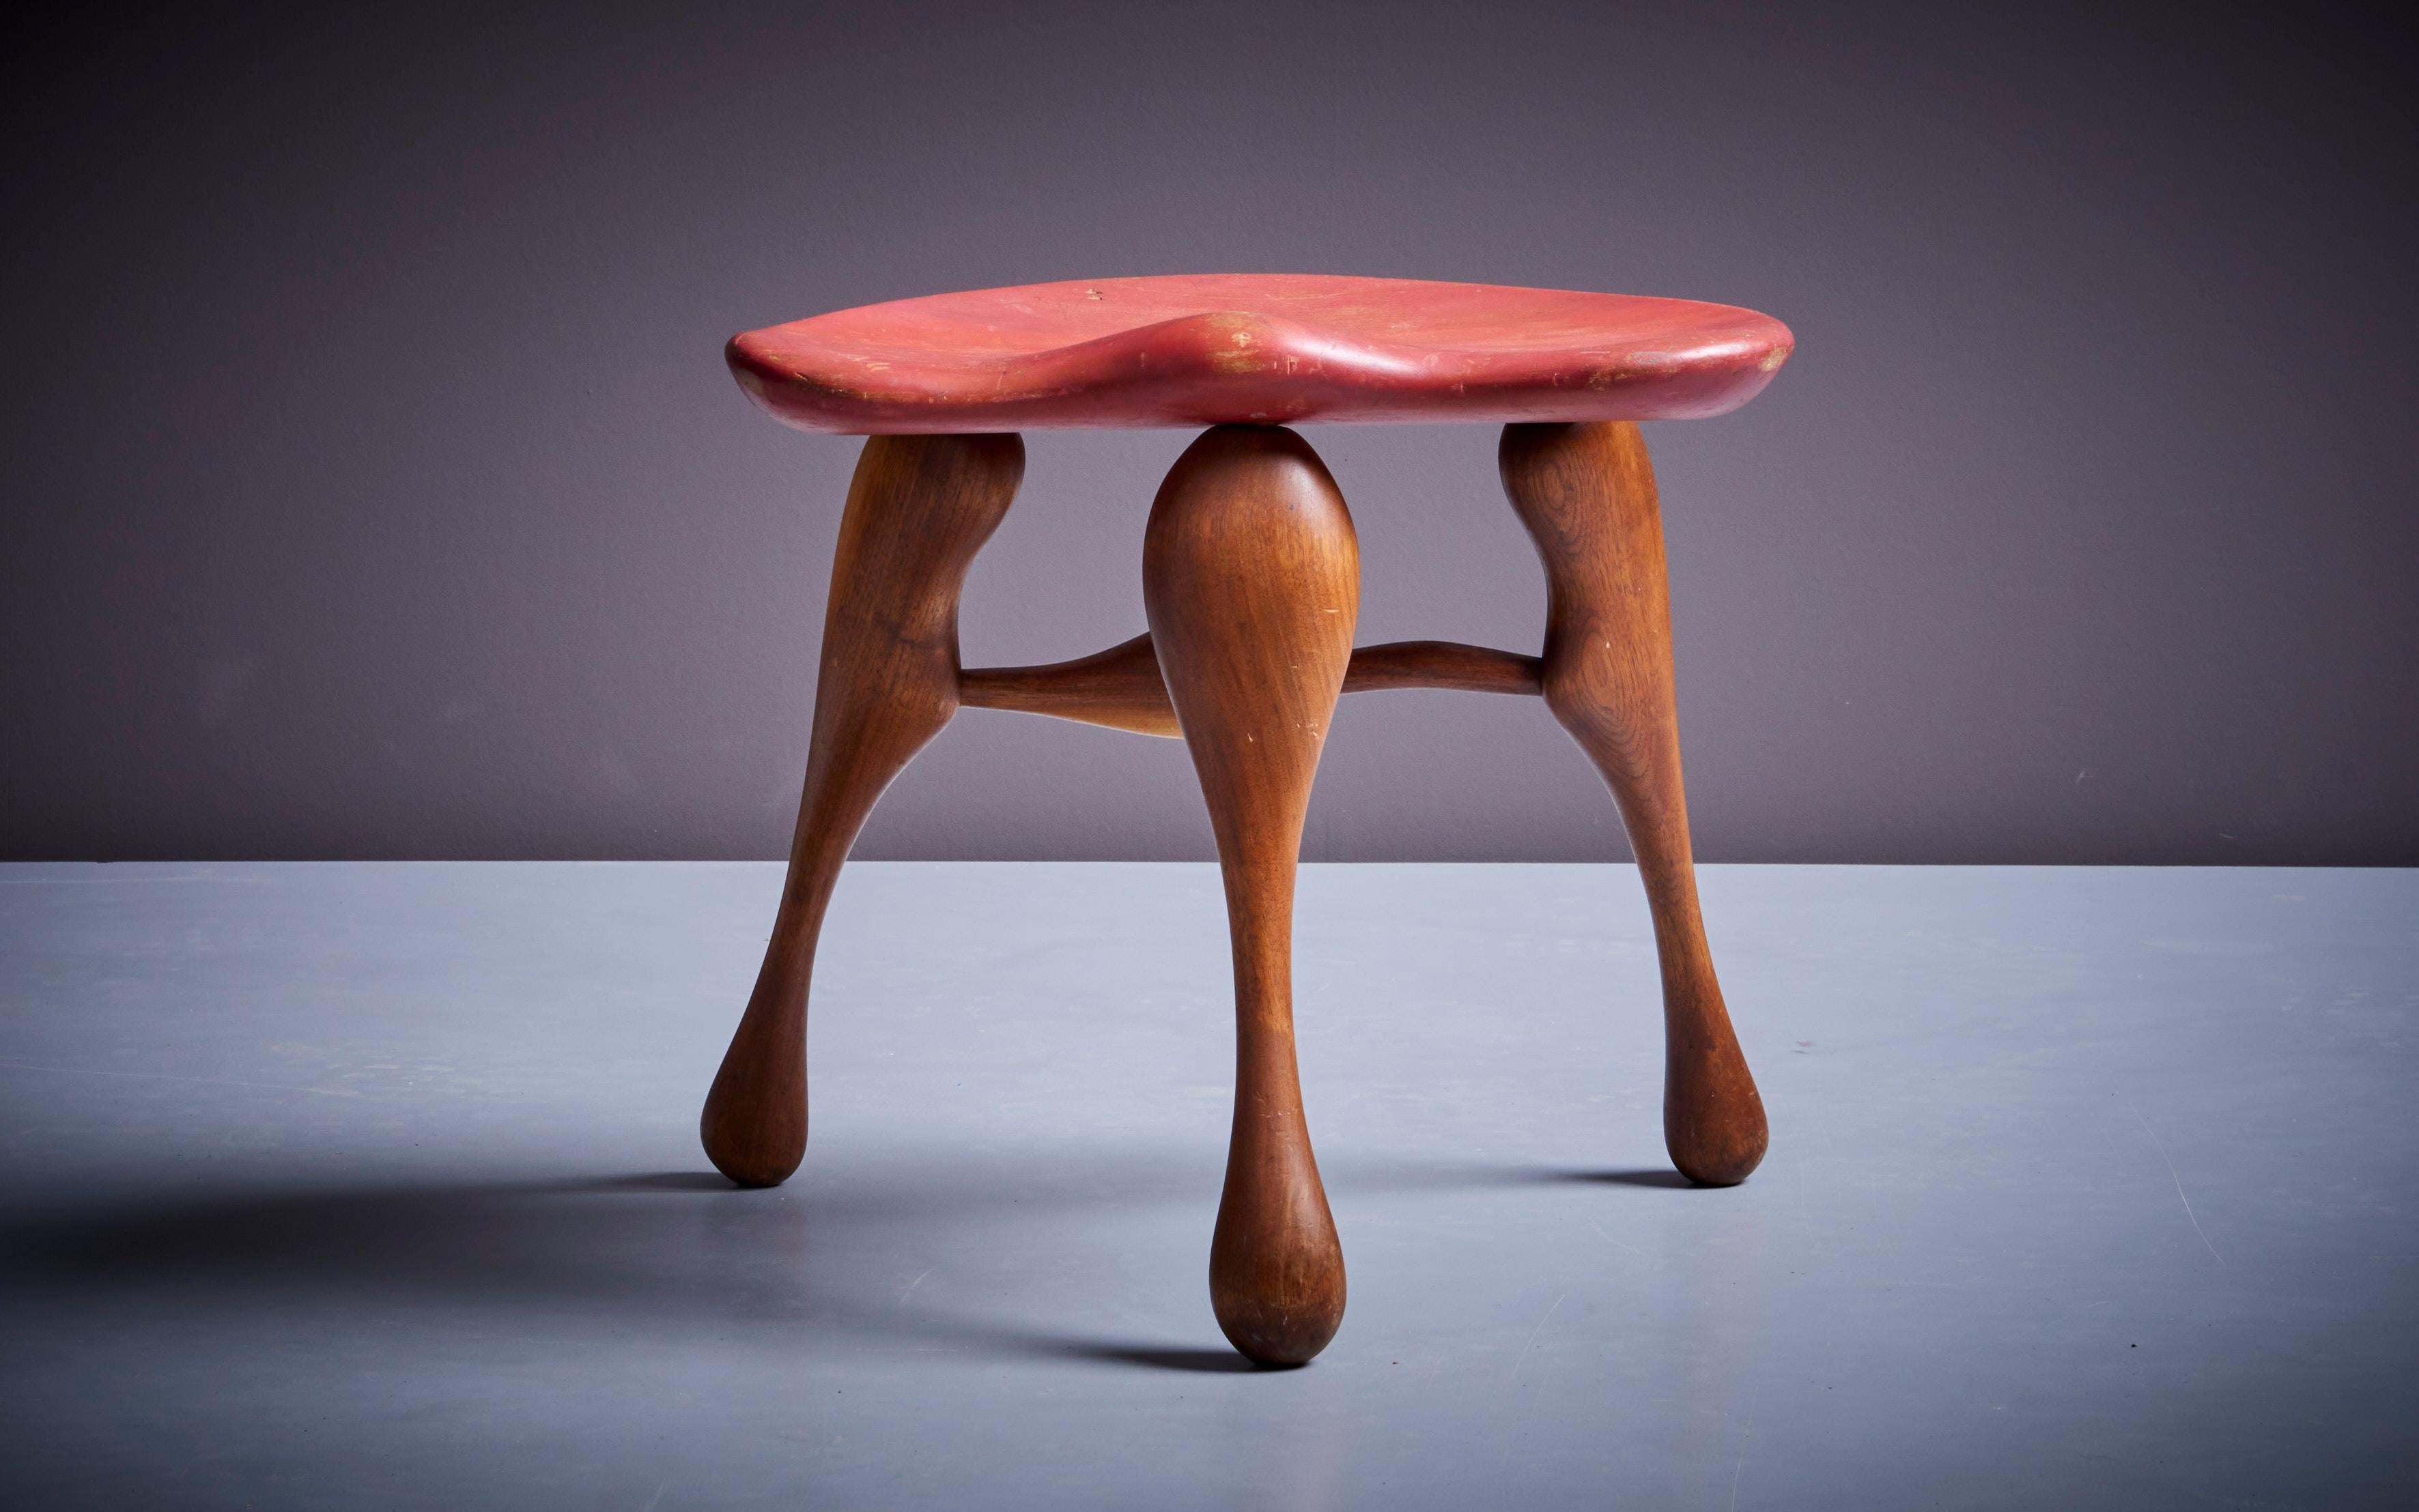 Sculptural handcrafted three legged stool by noted studio furniture maker Ron Curtis.